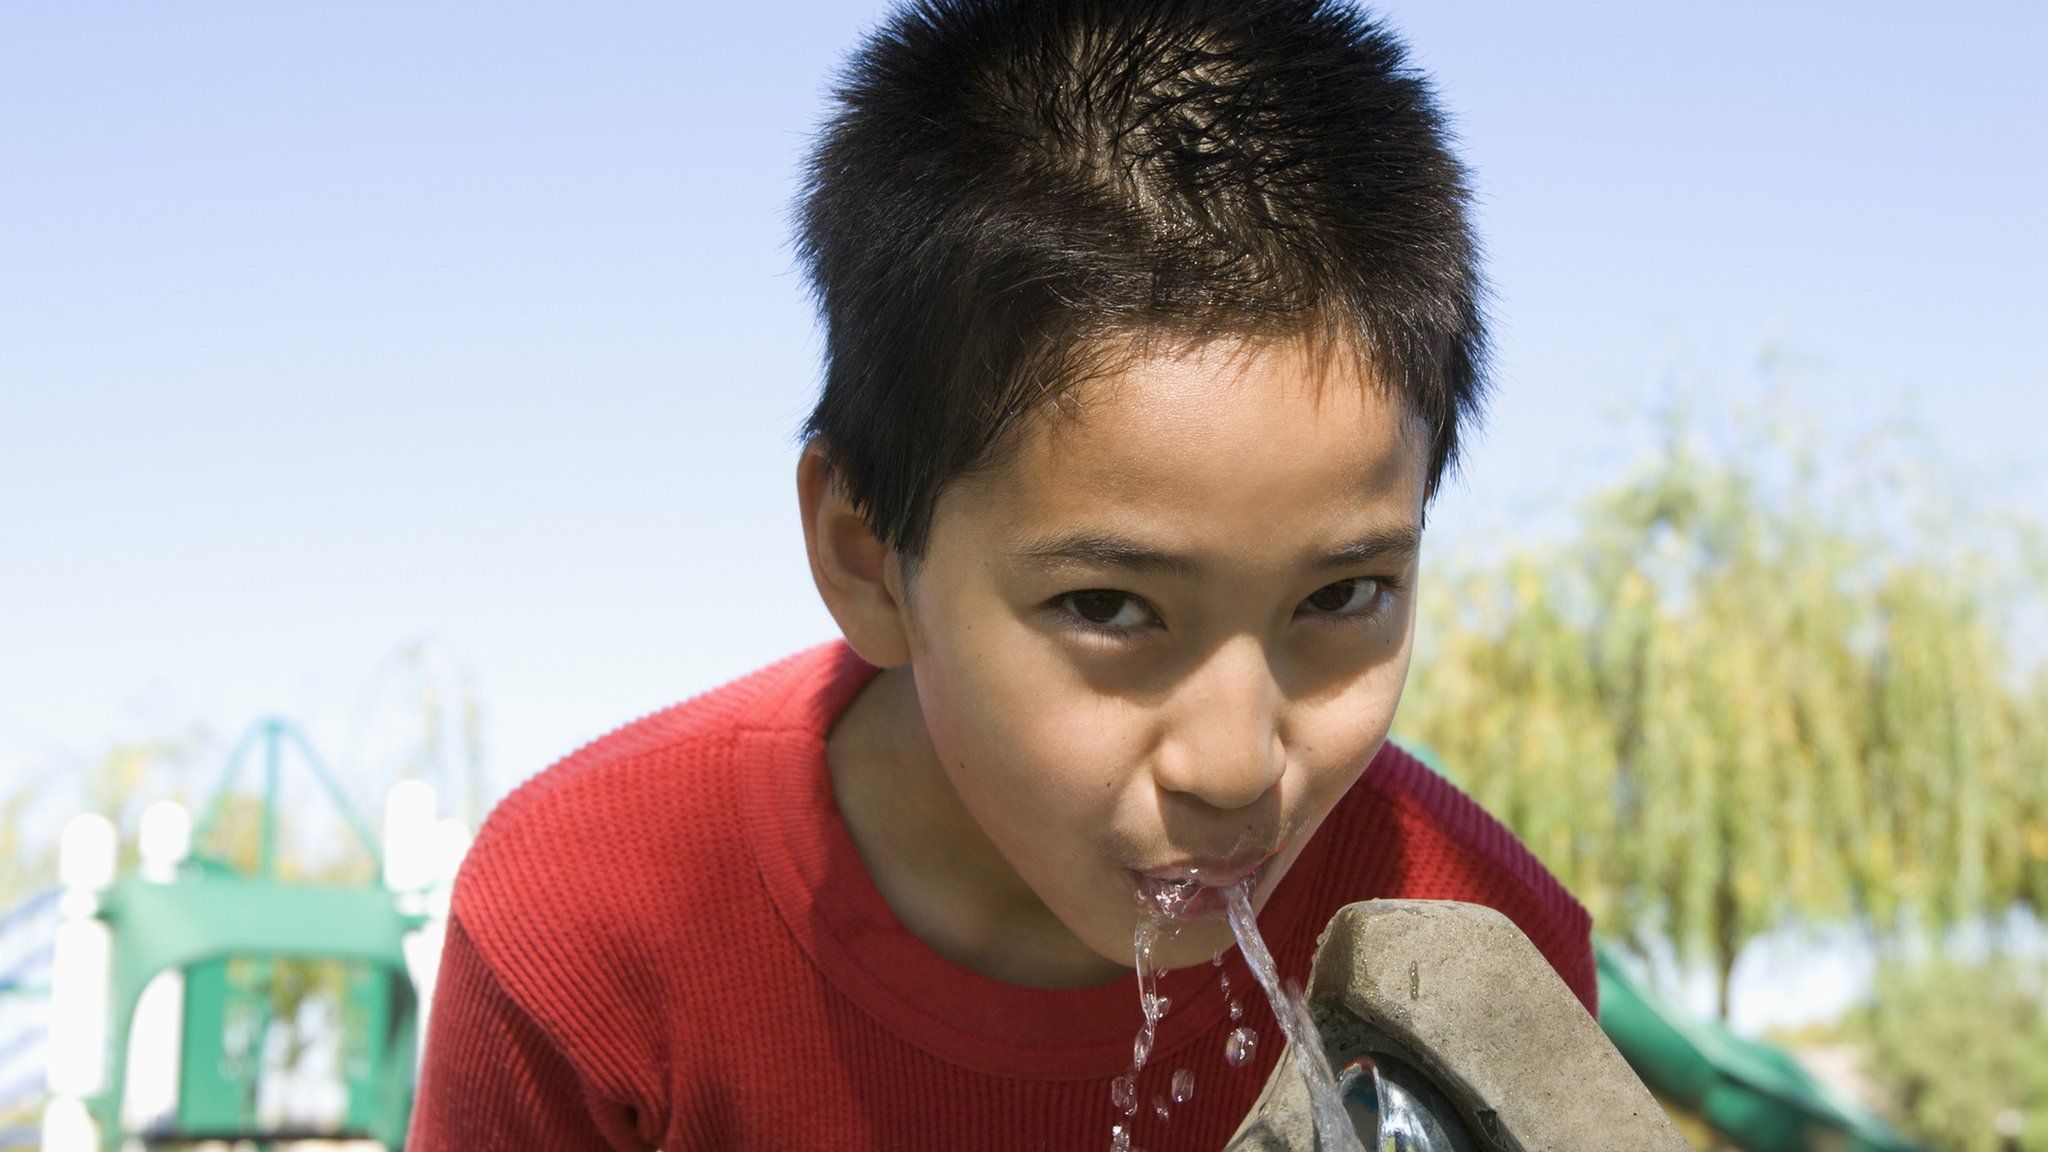 Boy drinking at a water fountain